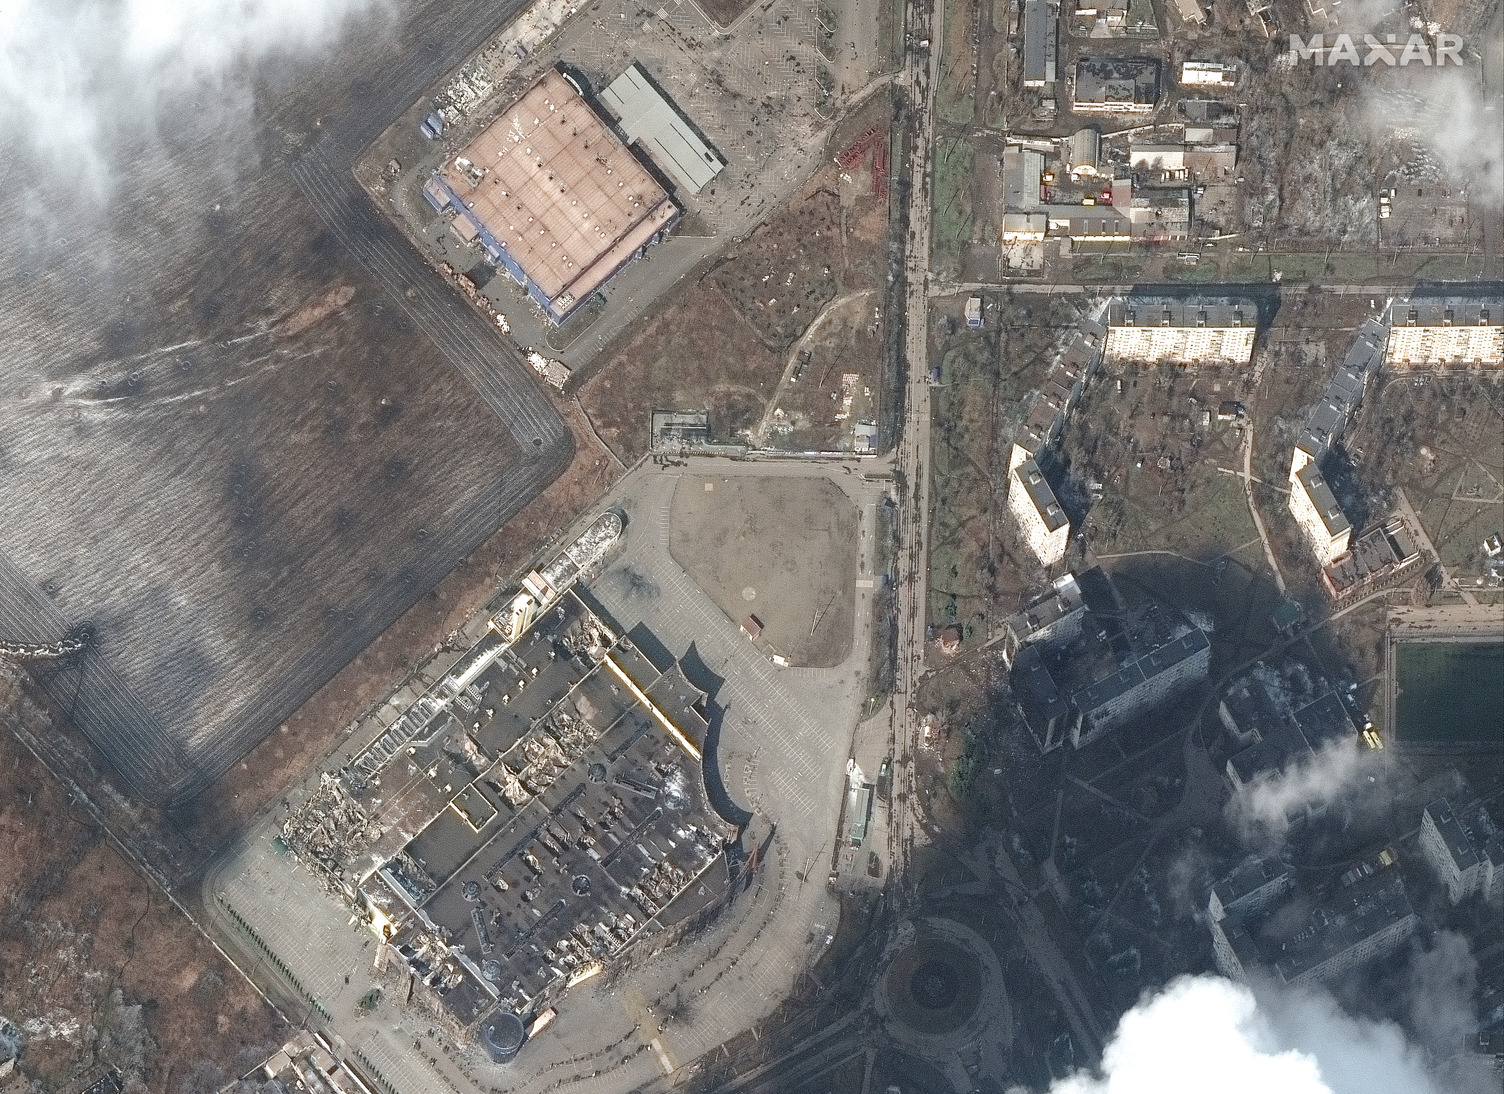 06_heavily damaged portcity shopping mall and other stores_western mariupol_ukraine_9march2022_wv3.jpg